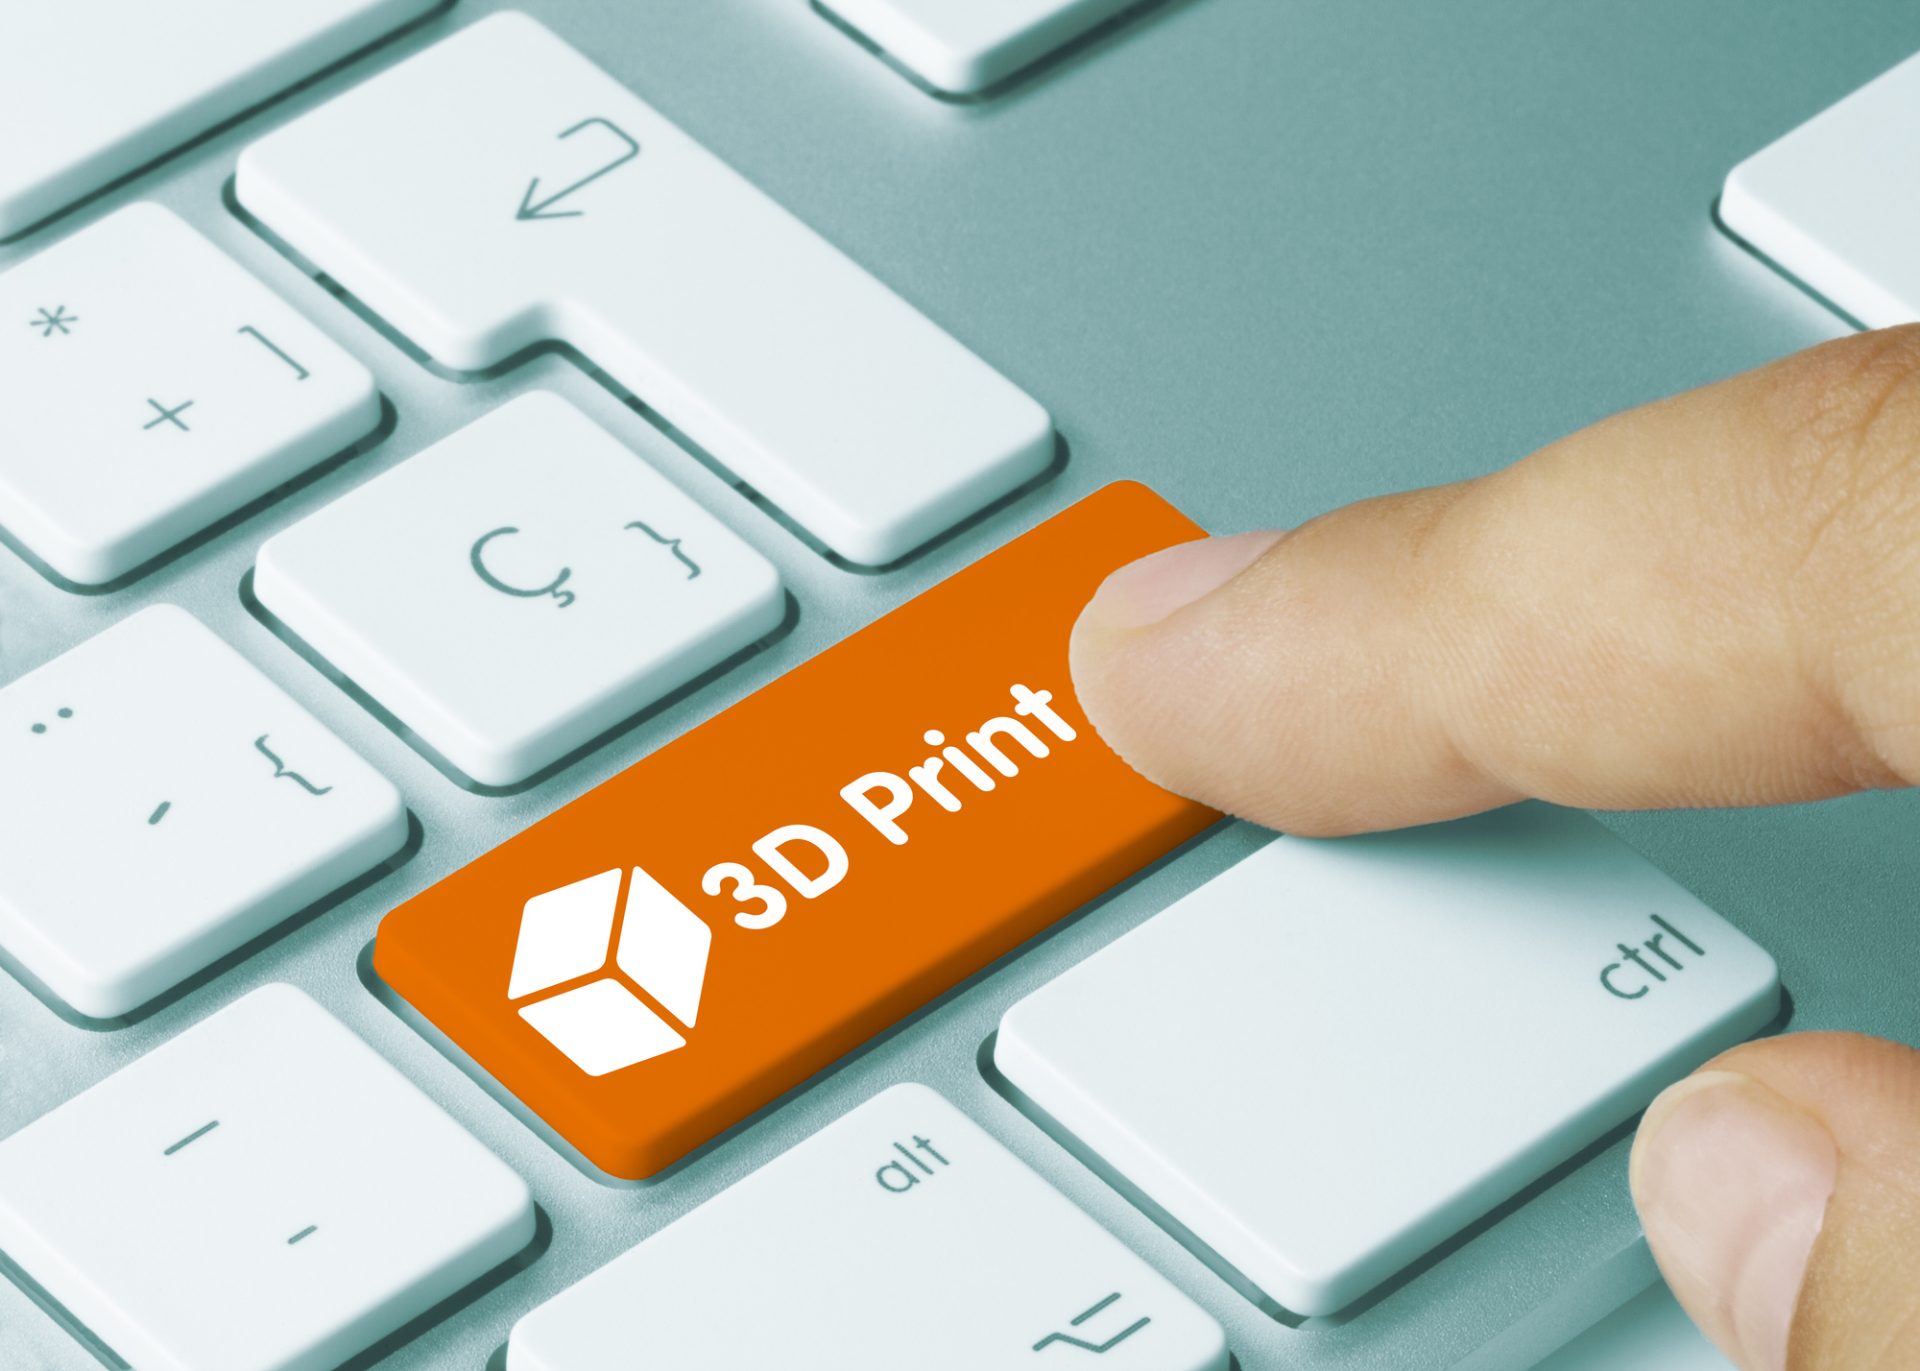 3D Printing Items: What You Can Make And What It Can Be Used For